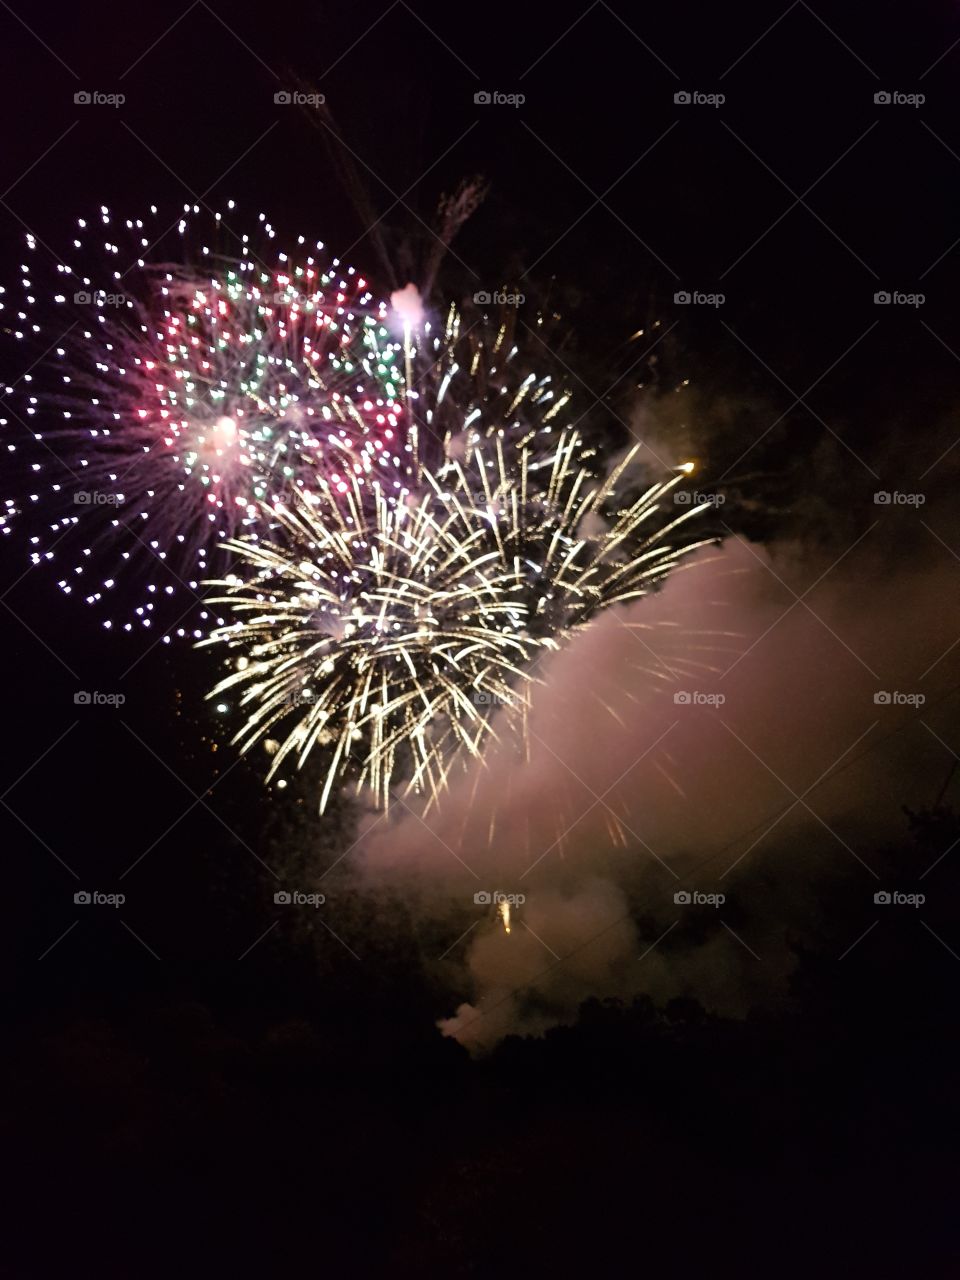 The time of year for celebration, magical effects of fireworks